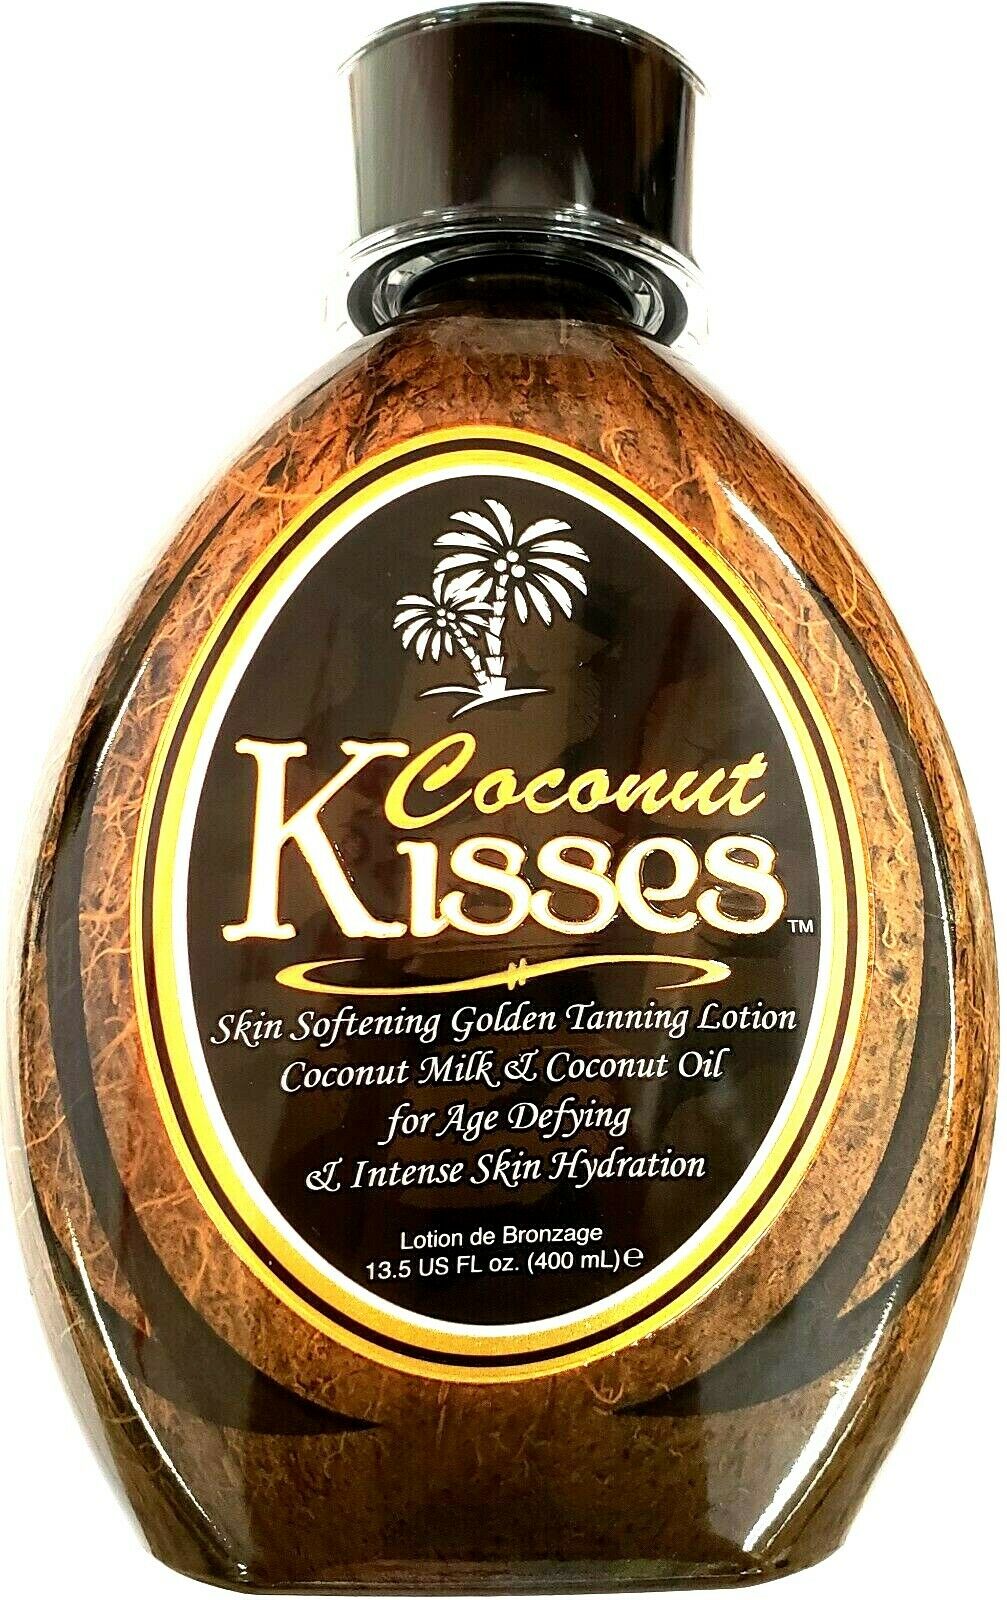 Ed Hardy Coconut Kisses Tanning Bed Lotion By Christian Audigier - image 1 of 2